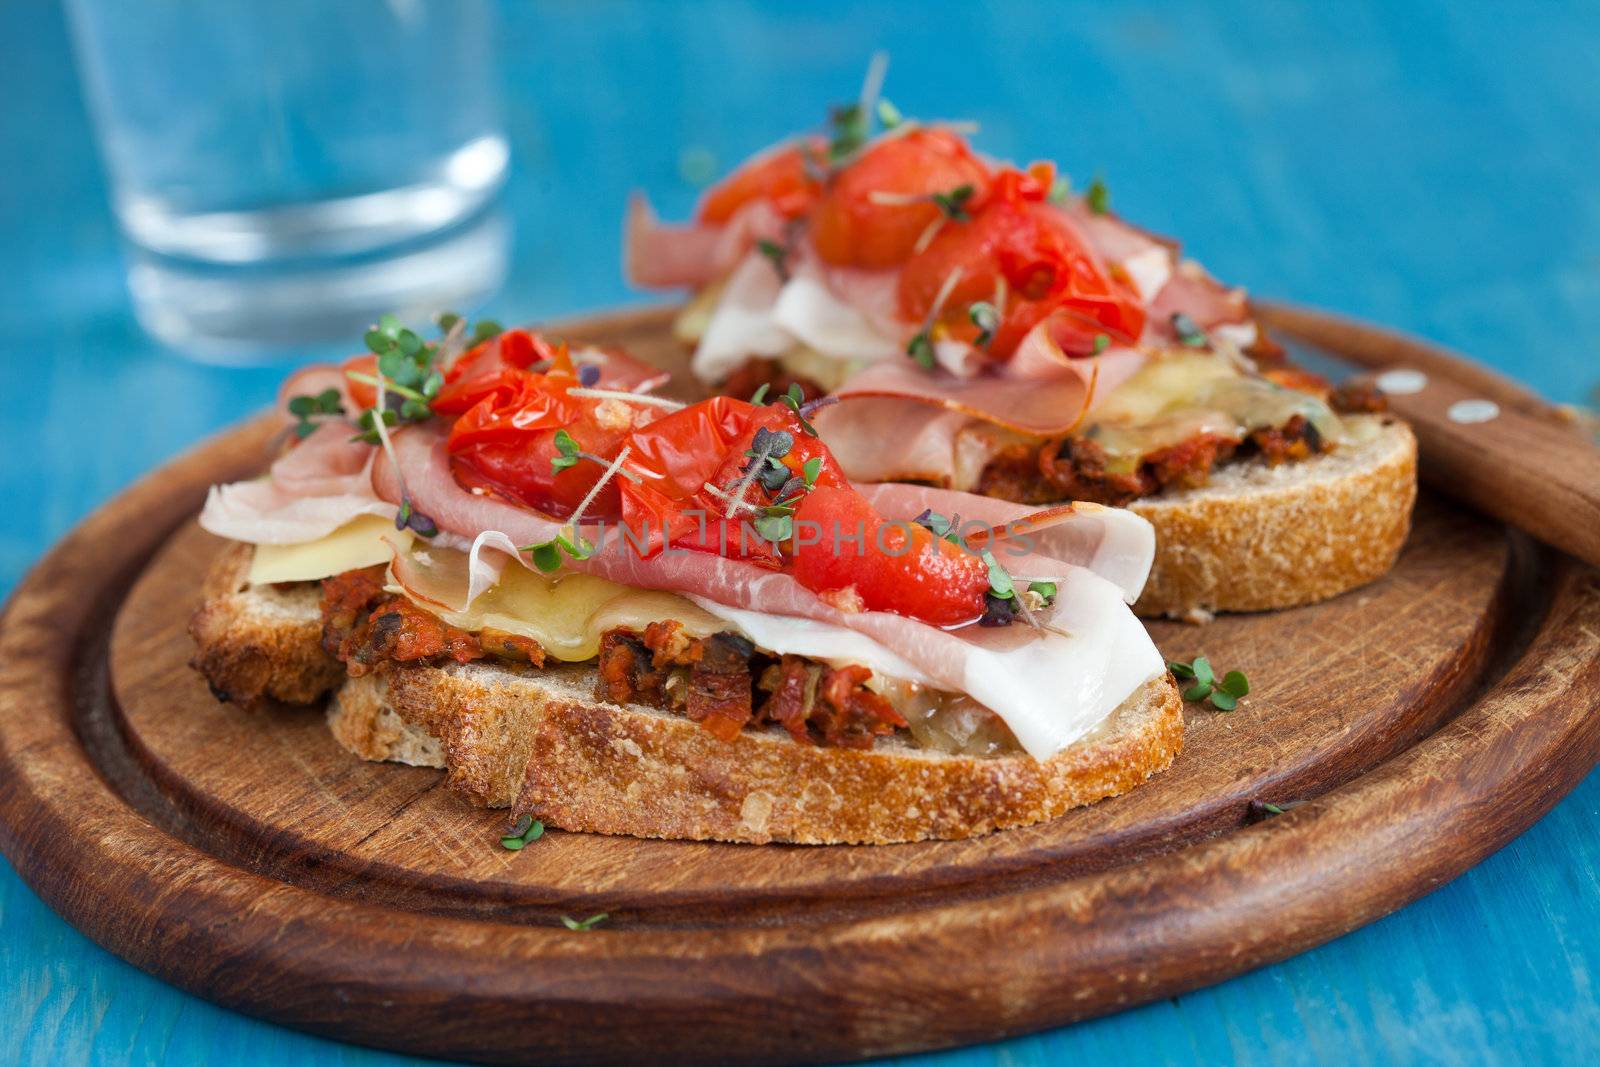 Delicious Italian bread dressed with grilled cheese and cherry tomatoes, ham, tapenade and mustard cress